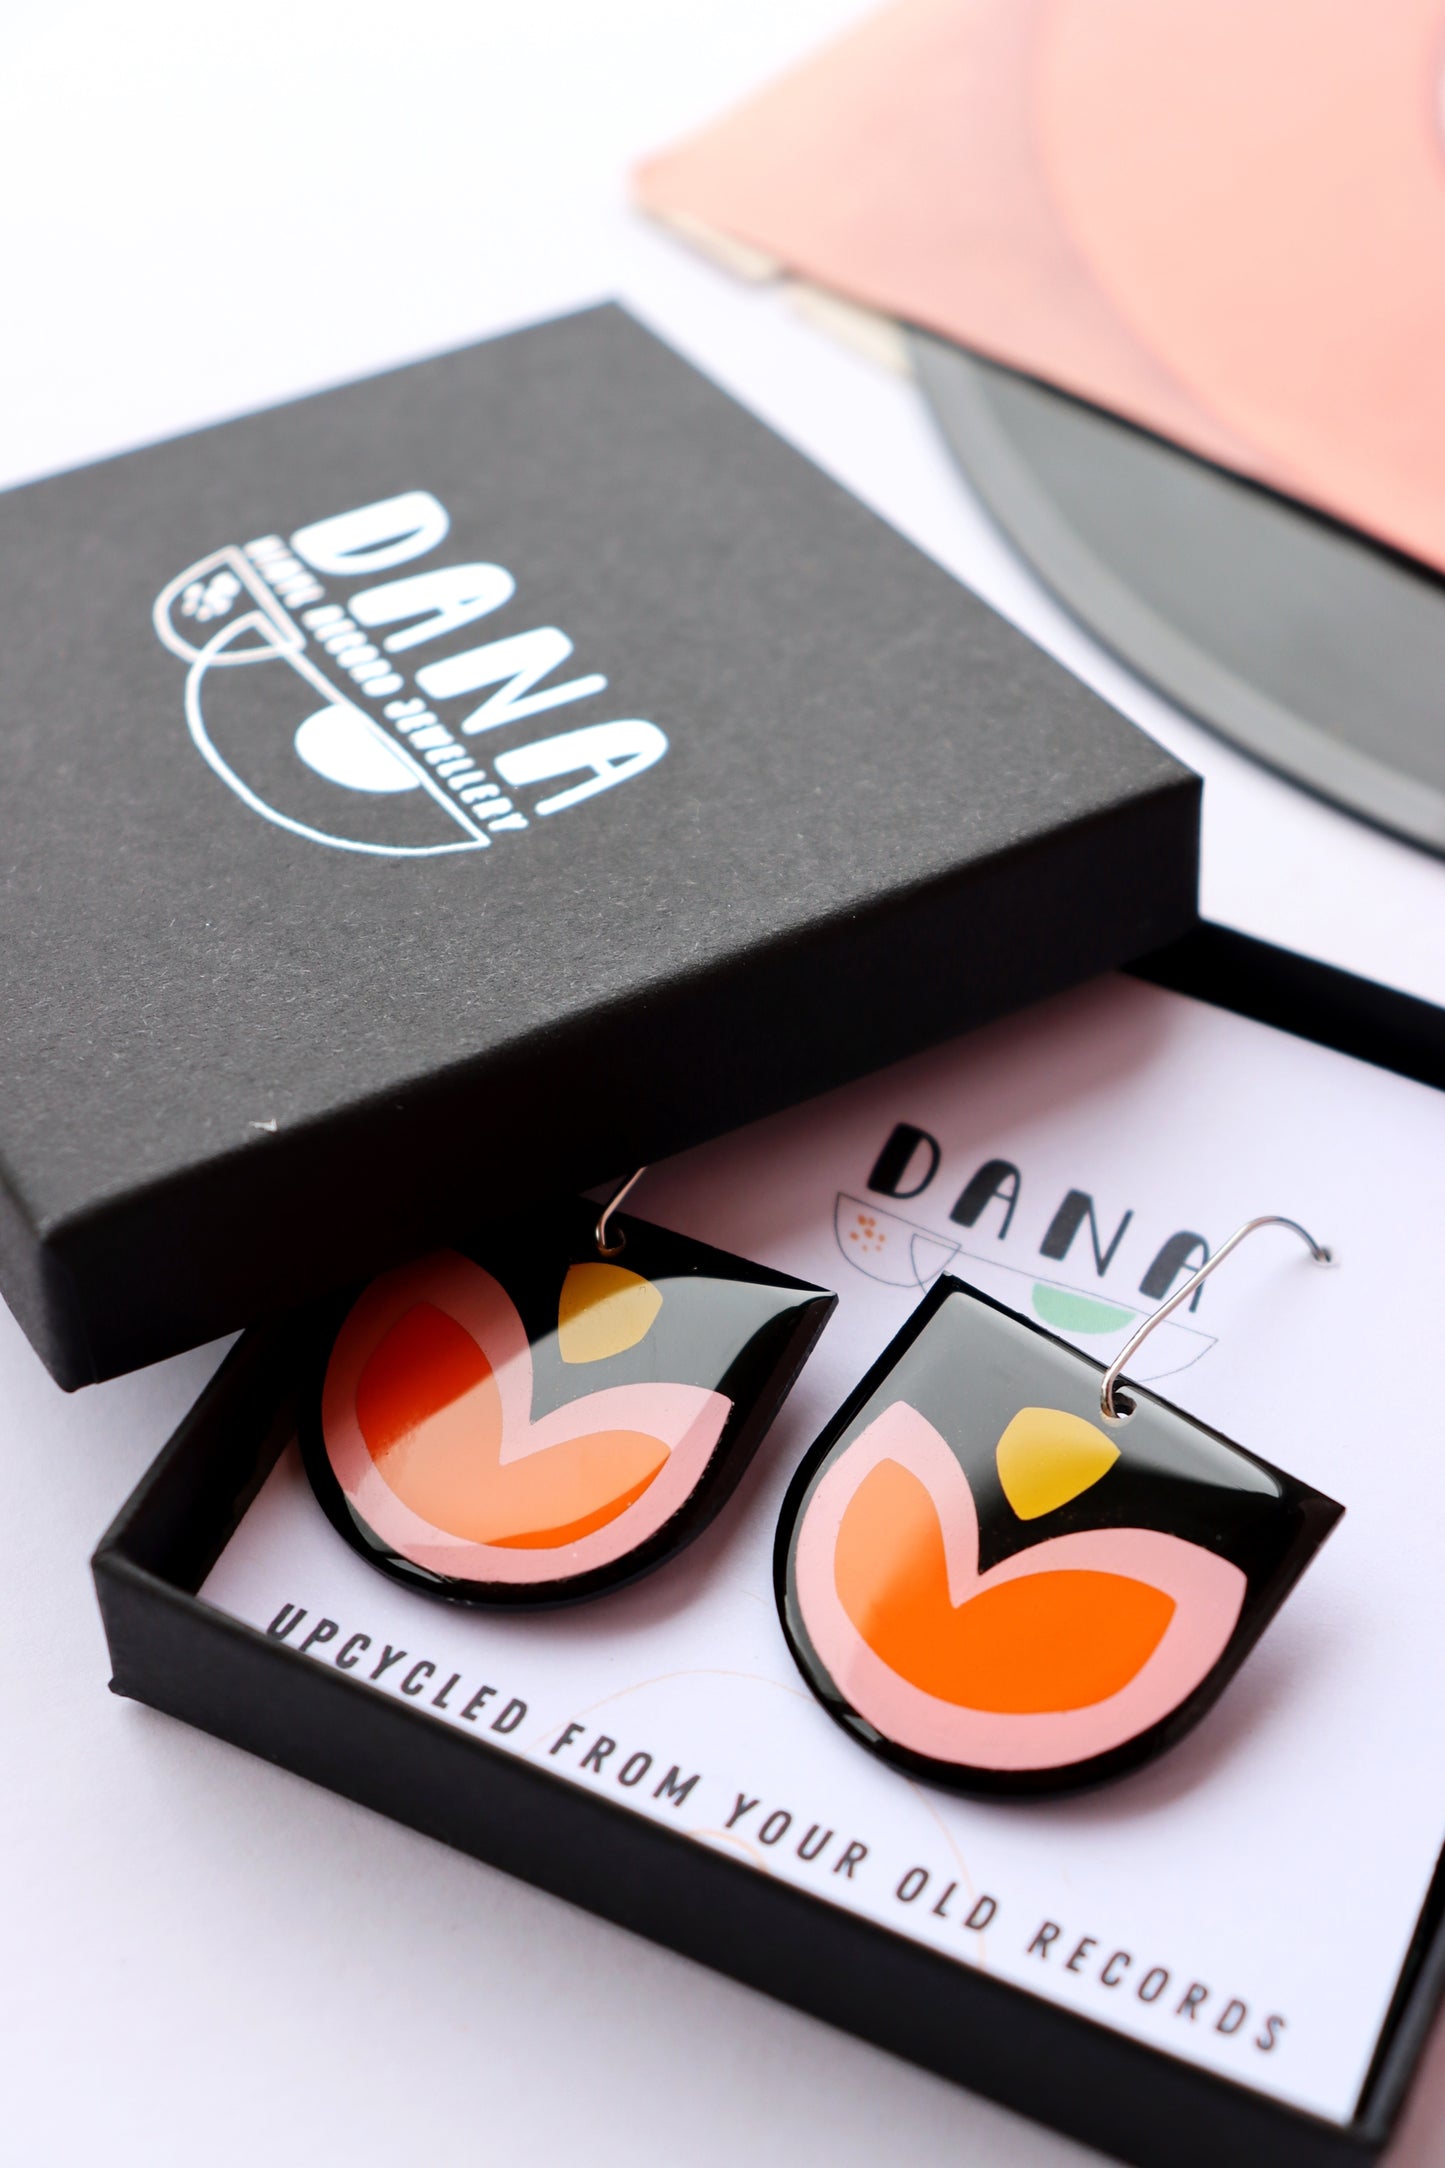 FLOR with a retro feel / upcycled vinyl record earrings